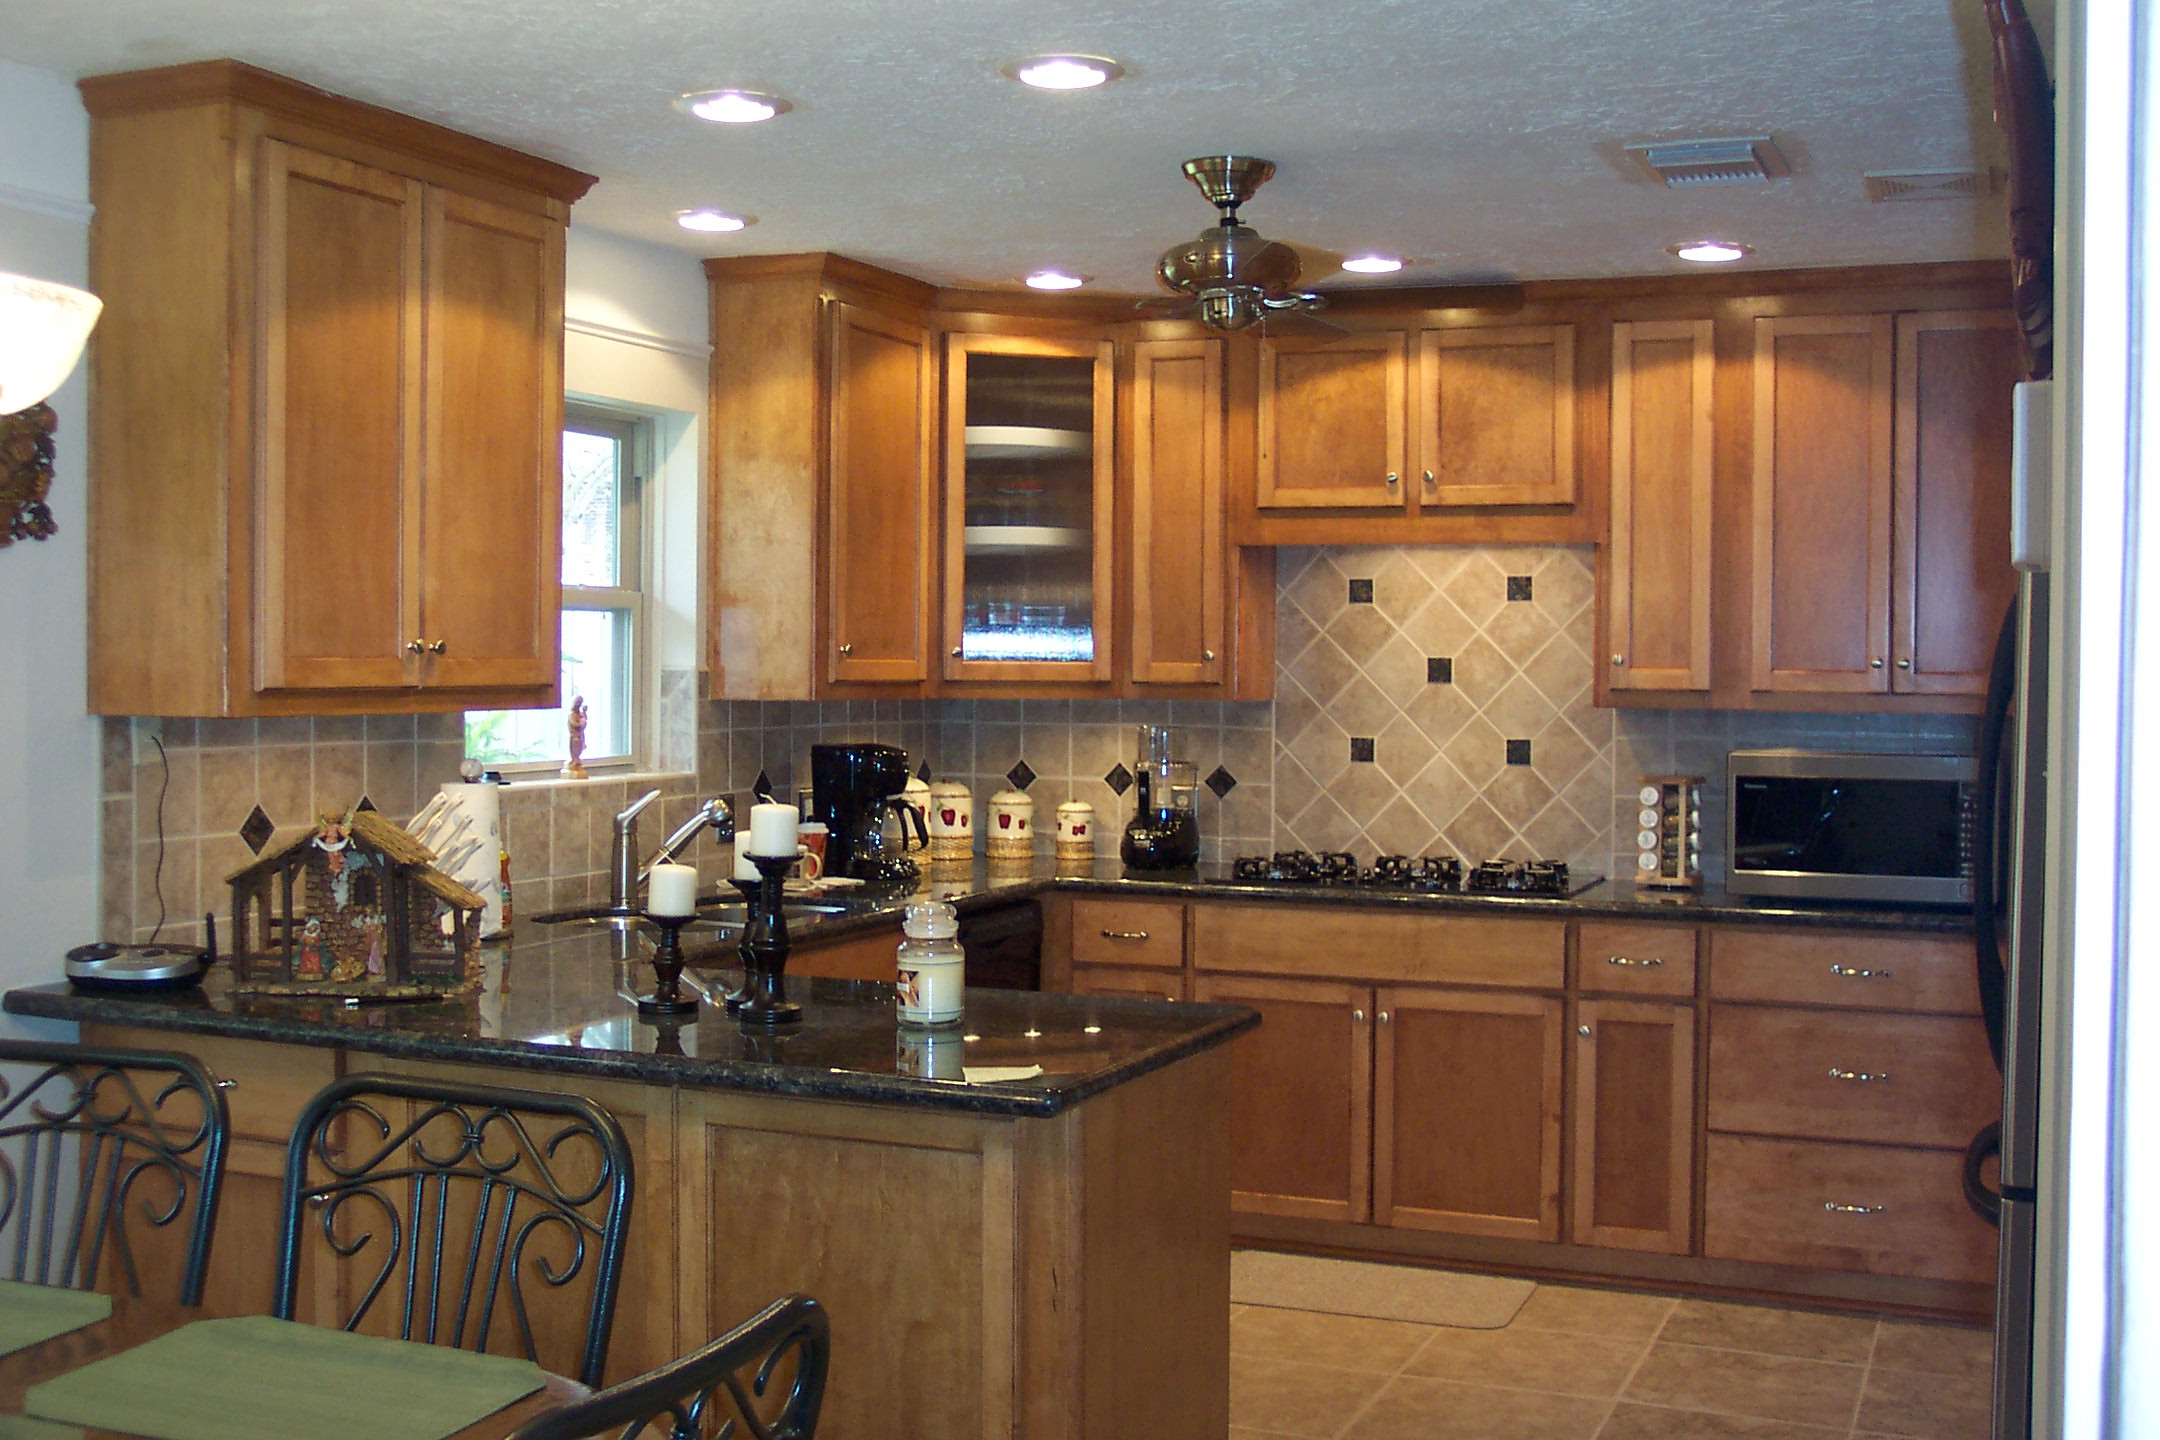 Remodel Ideas For Kitchen
 Kitchen Remodeling Ideas & s